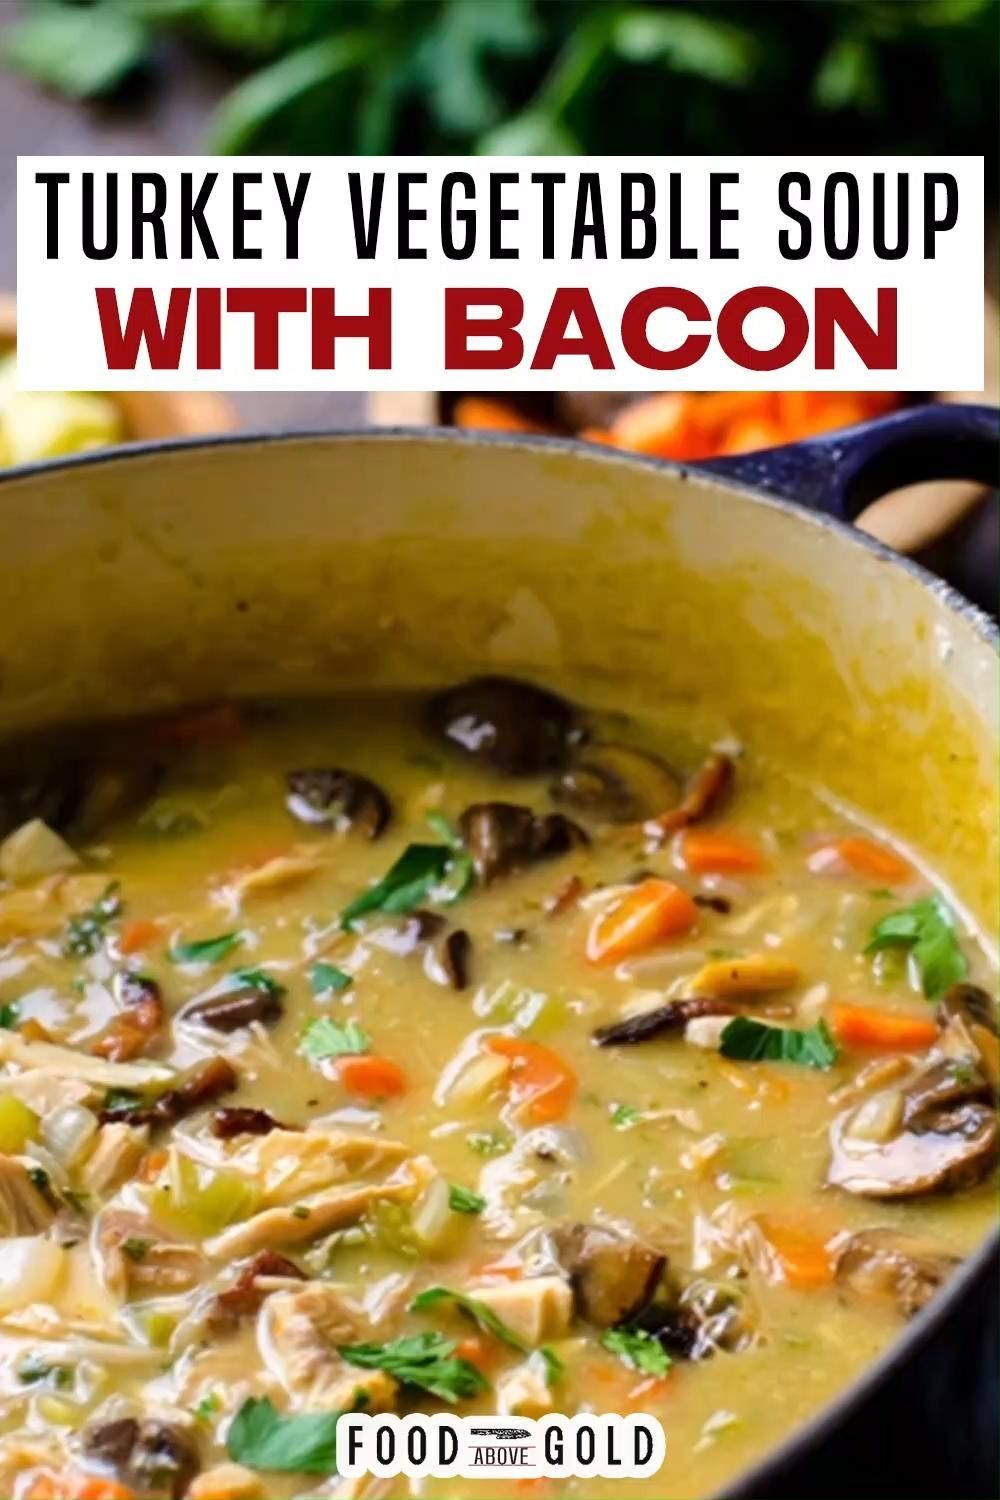 Leftover Turkey Vegetable Soup with Bacon Recipe -   Popular